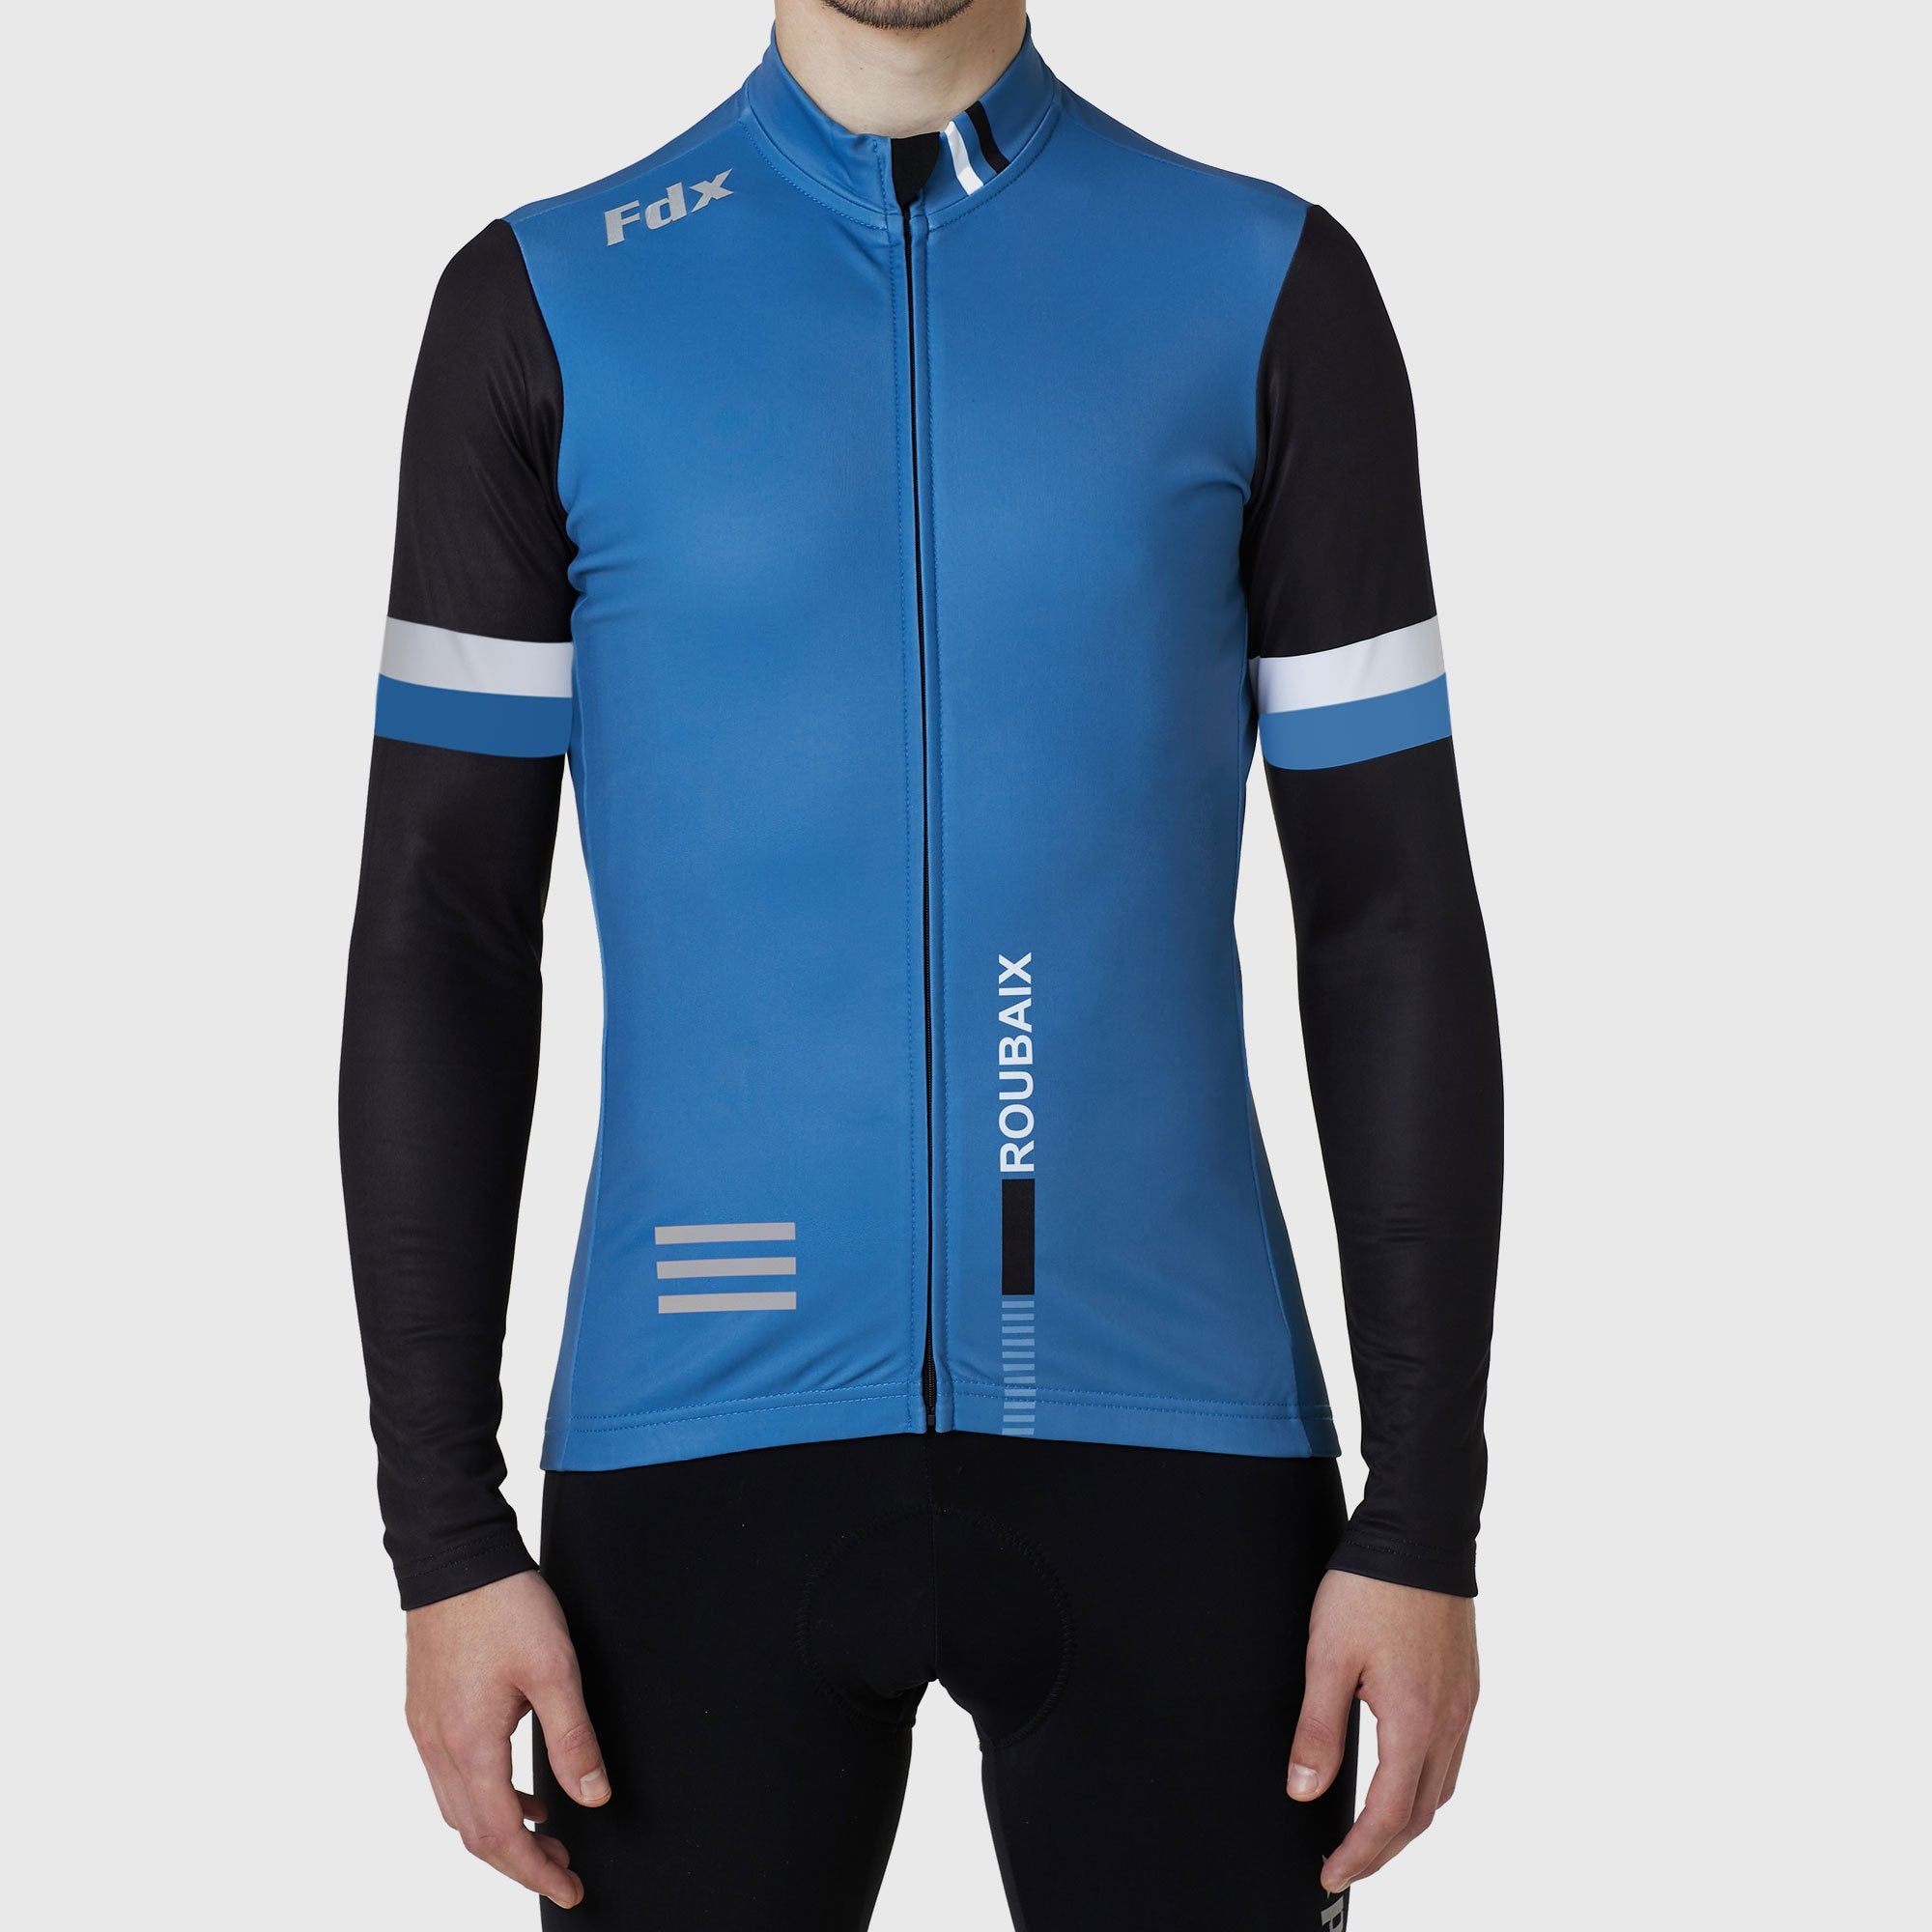 Fdx Limited Edition Blue Men\'s FDX Sports Sleeve Long Sports® FDX - Jersey | Cycling US Thermal